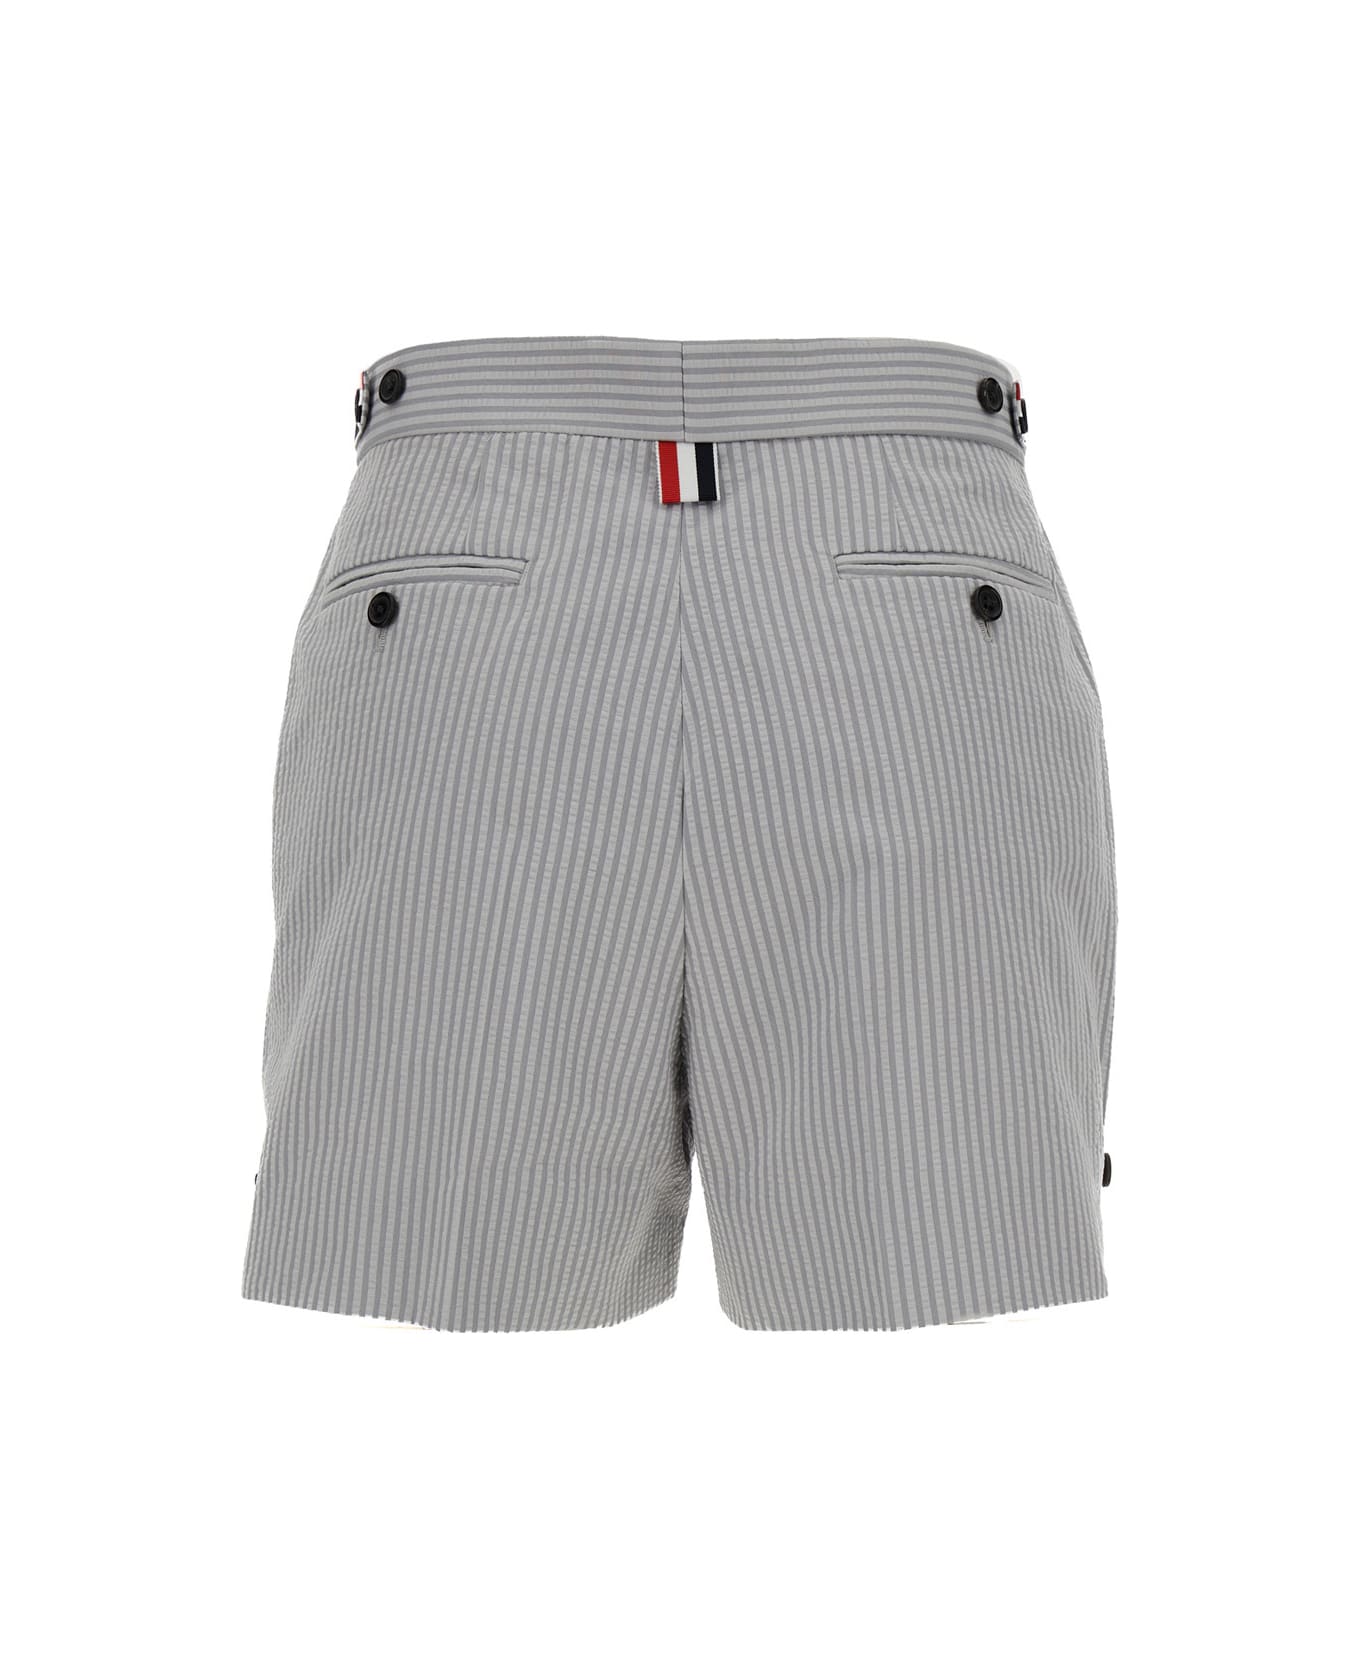 Thom Browne Angled Pocket Thigh Length Short W/ Side Tabs In Cotton Seersucker - LT GREY ショートパンツ